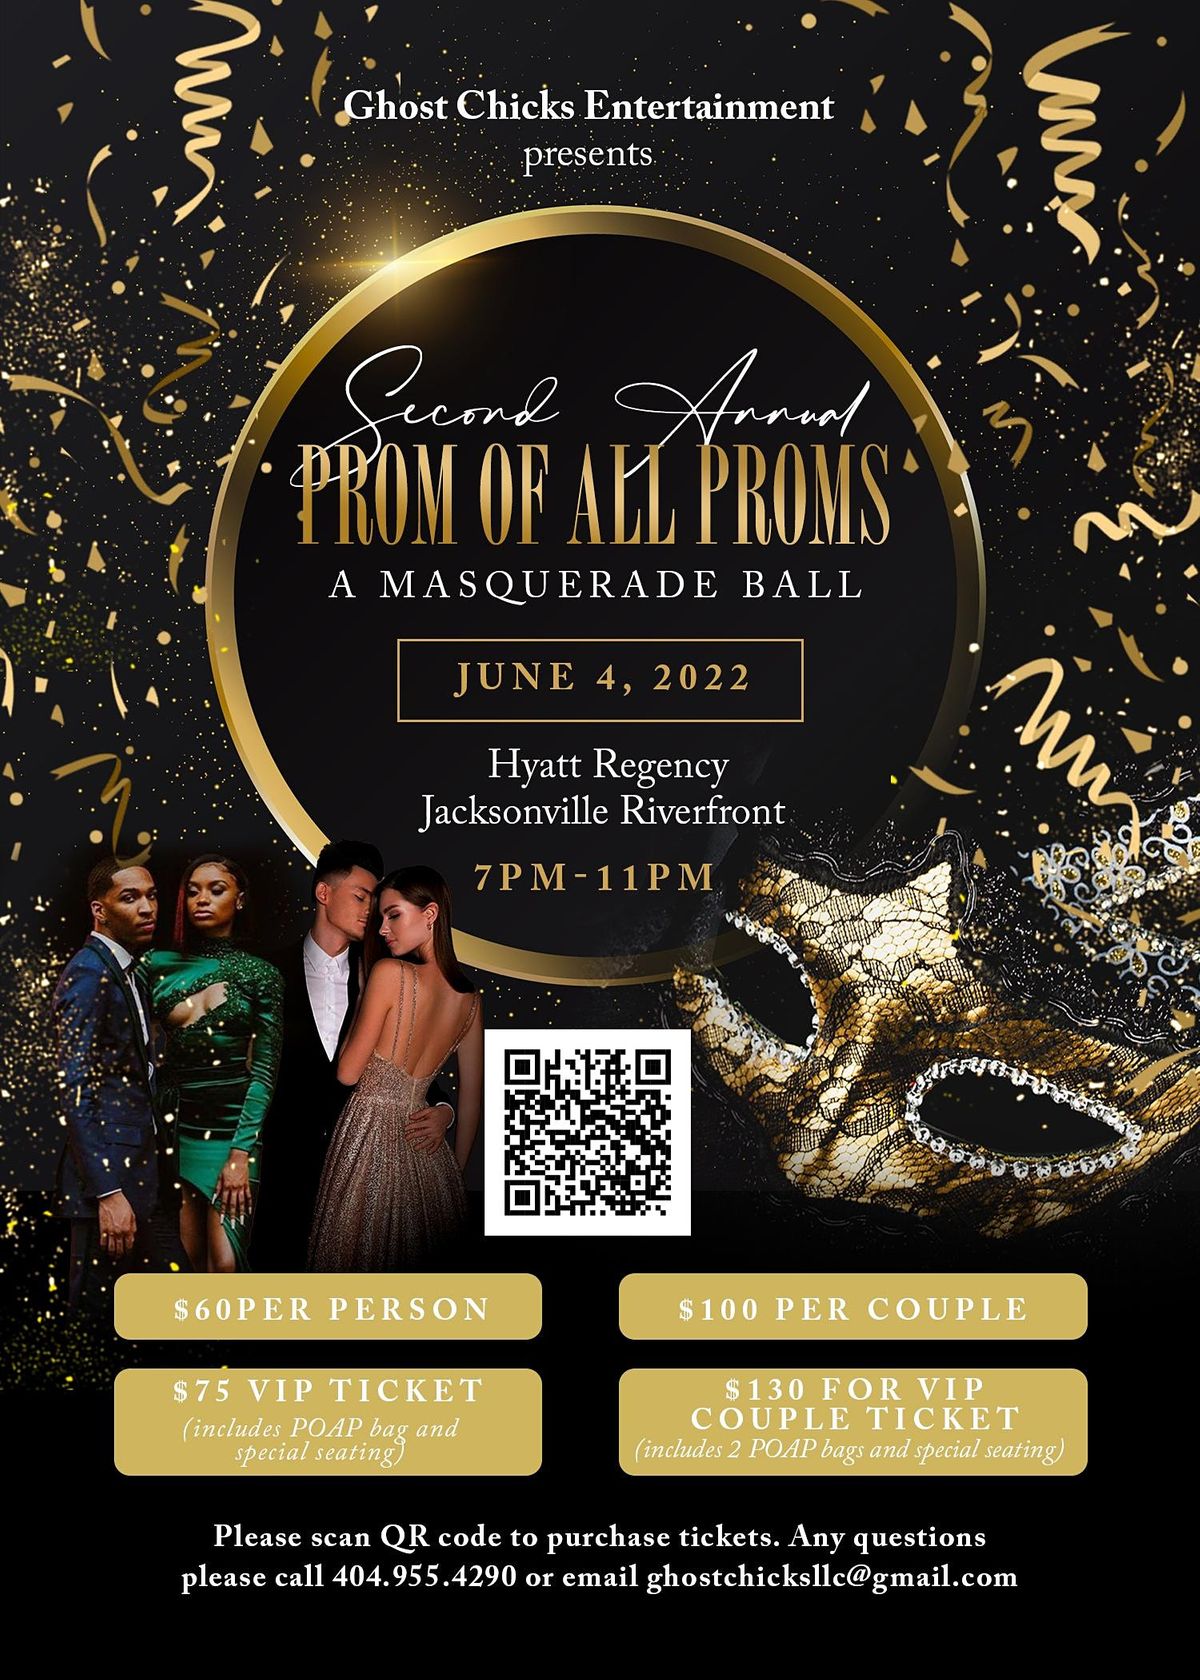 Prom of All Proms